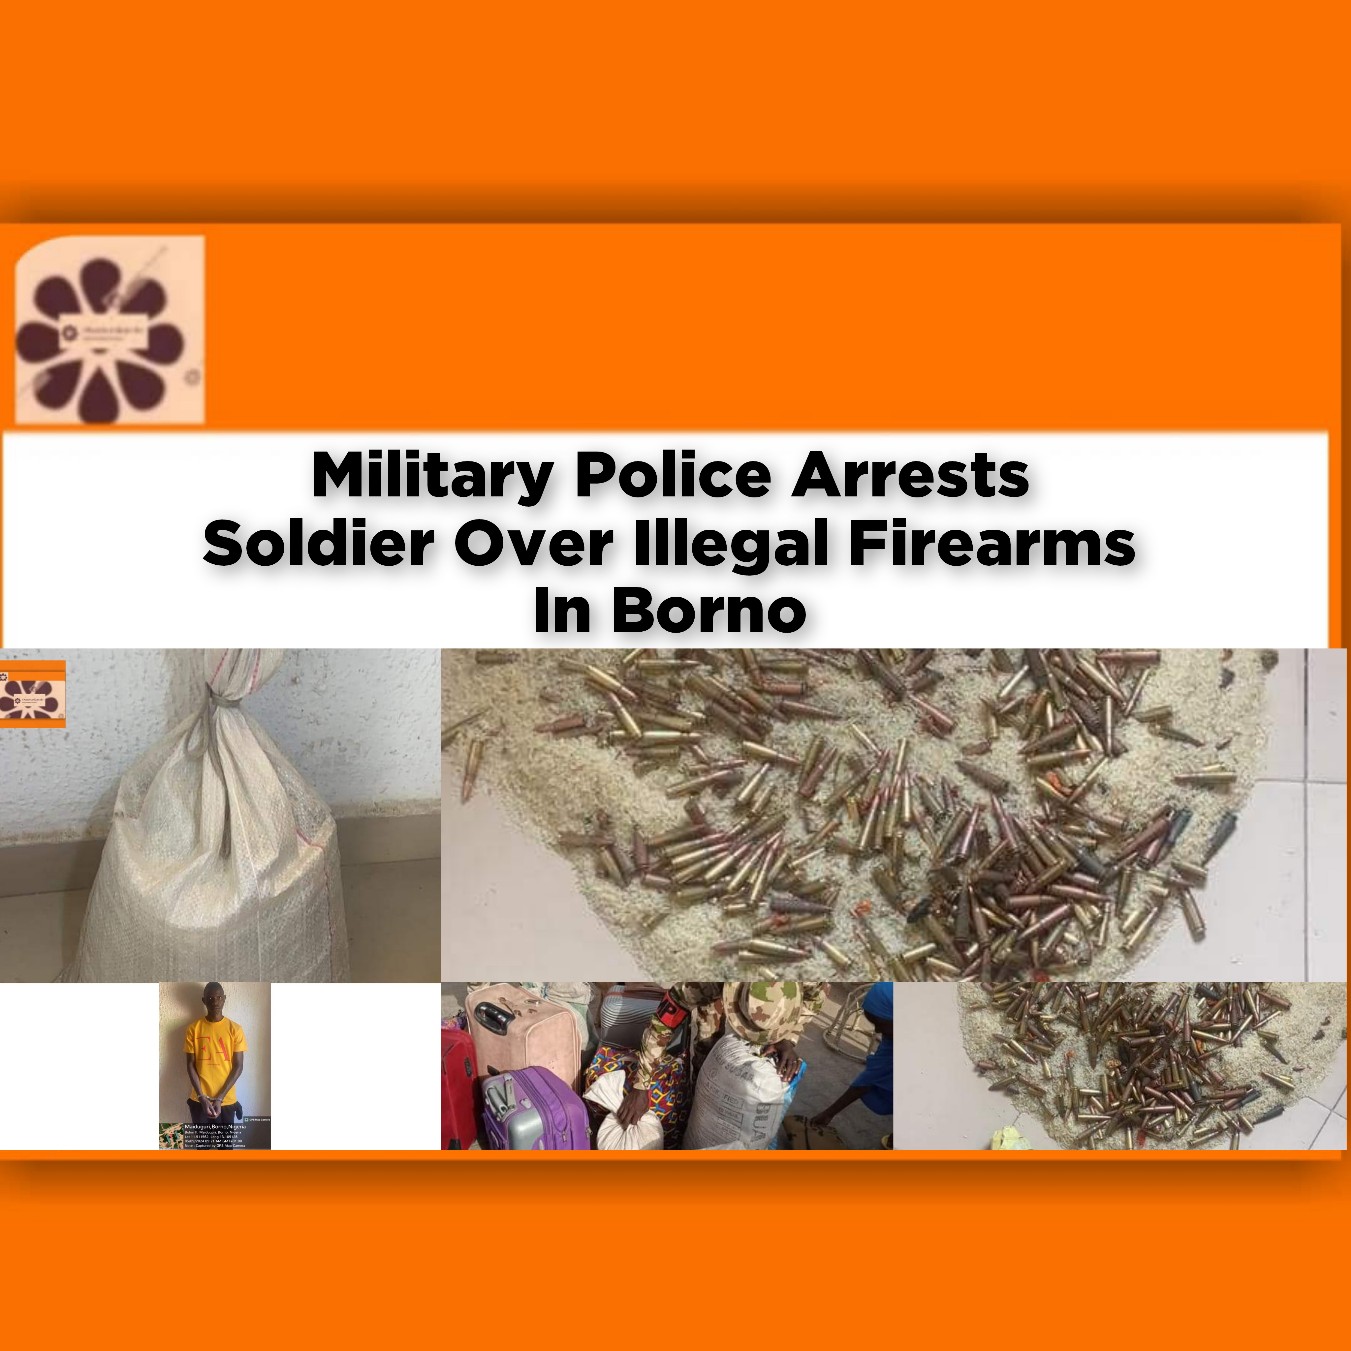 Military Police Arrests Soldier Over Illegal Firearms In Borno ~ OsazuwaAkonedo #NsimaEkere